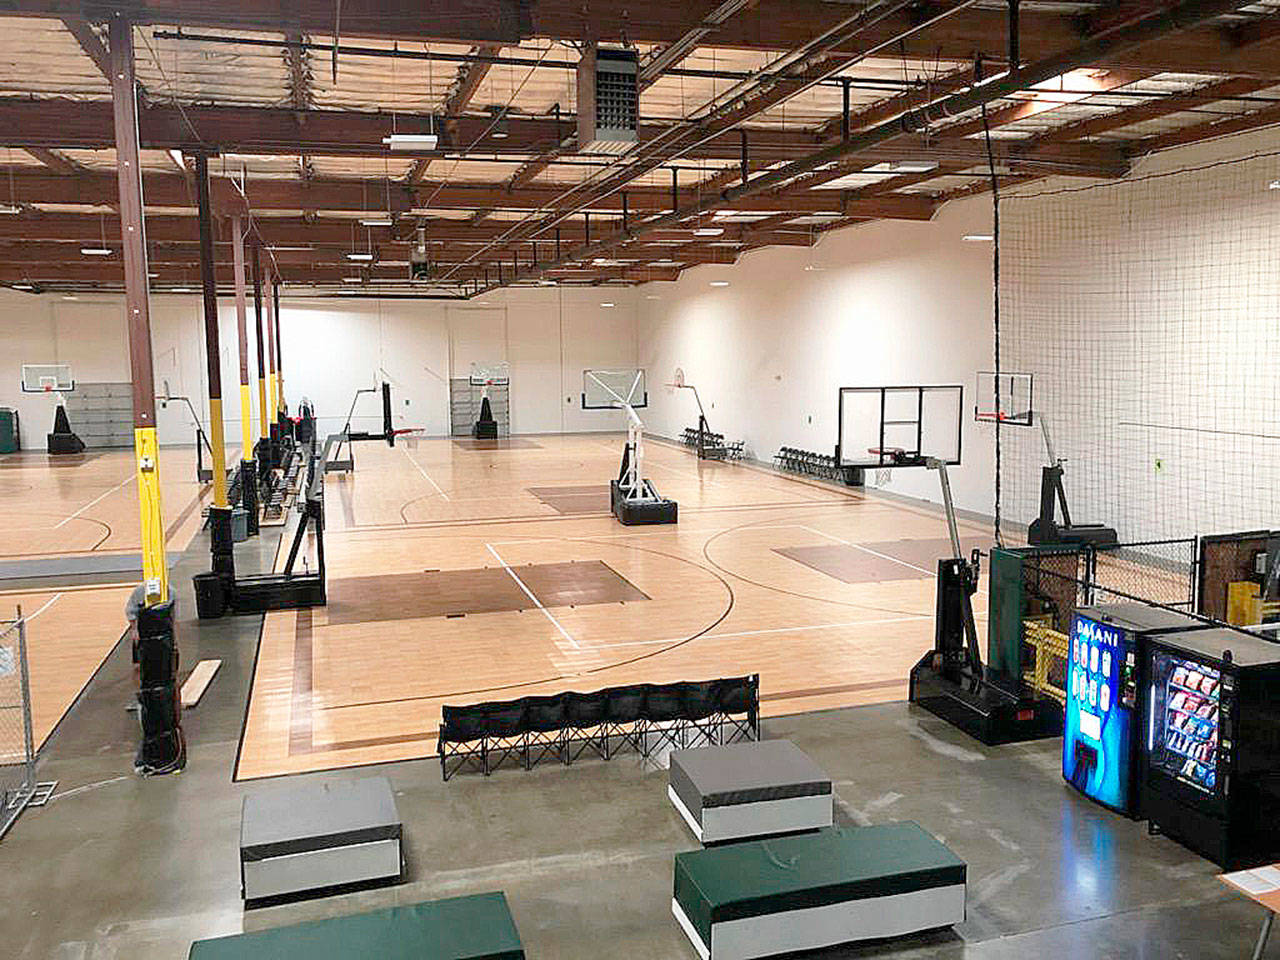 The Emerald City Basketball Academy recently opened a new facility in north Kent. COURTESY PHOTO